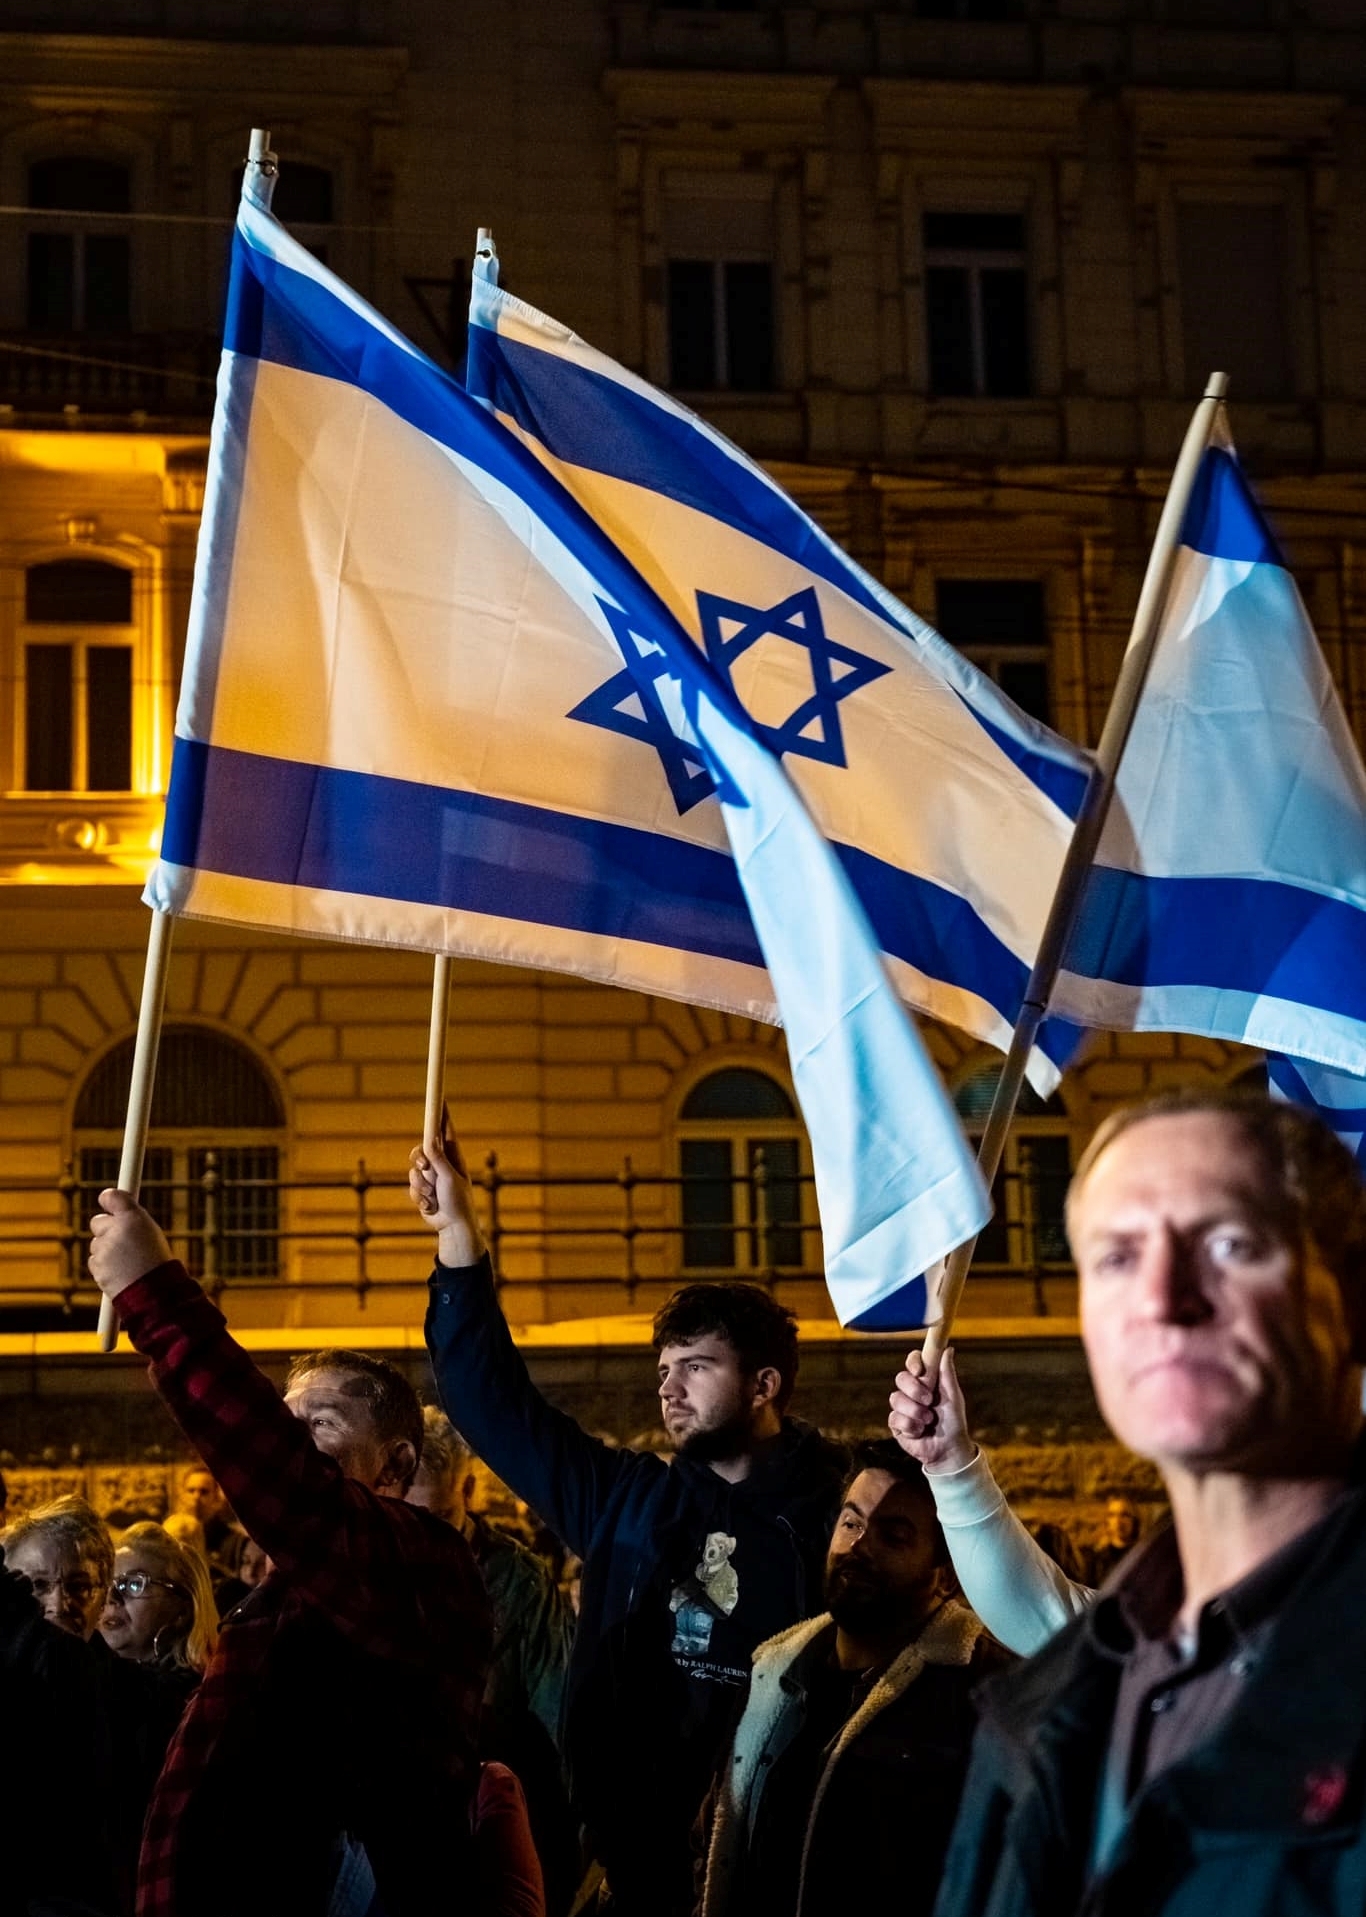 Budapest March in Stark Contrast With Pro-Hamas Celebrations Across Europe